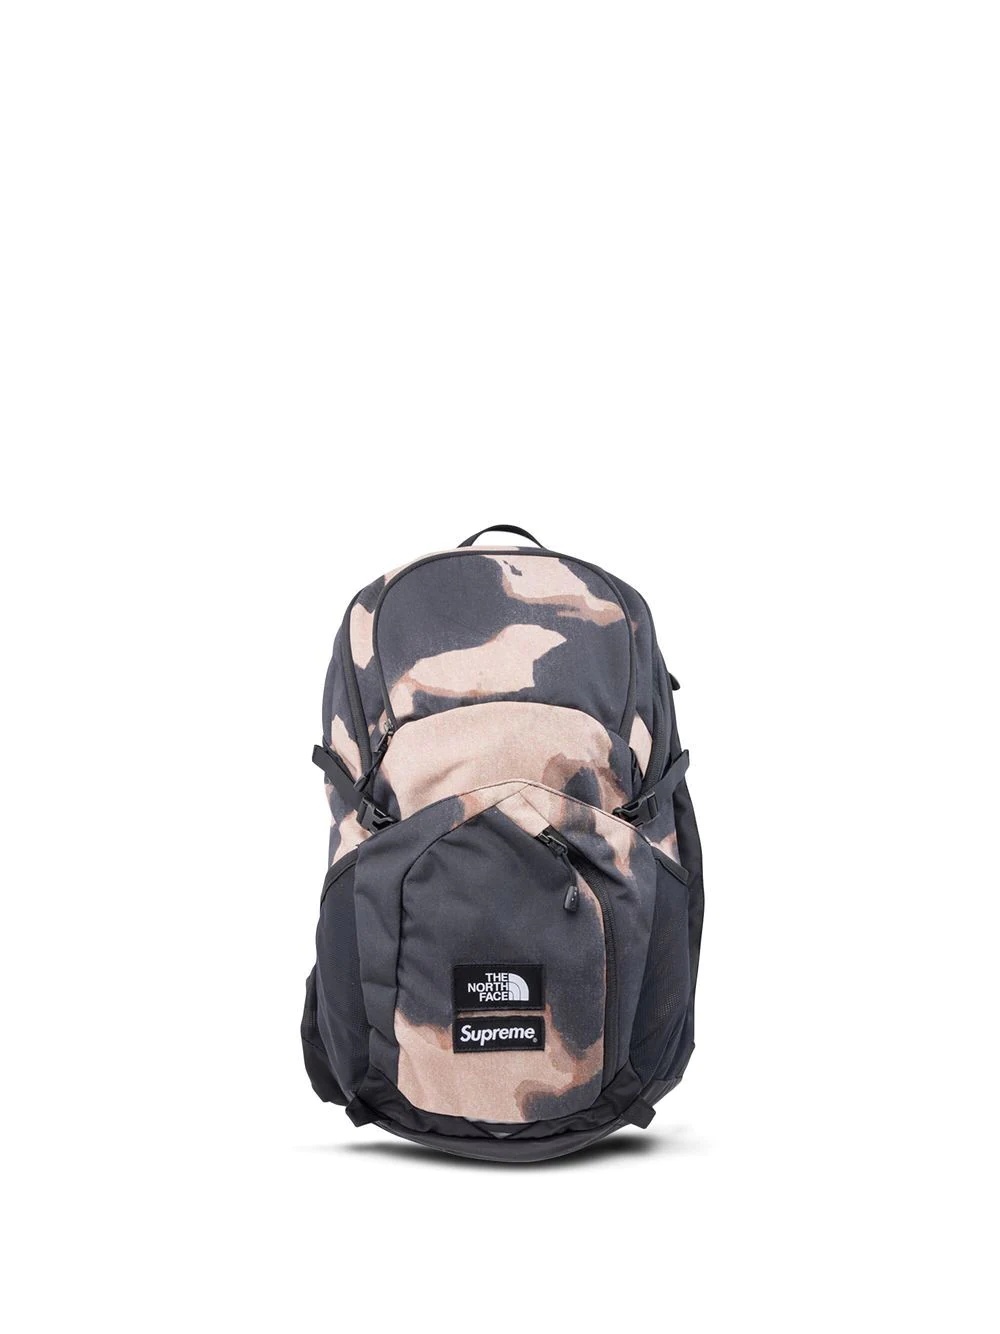 x The North Face bleach-effect Pocono backpack